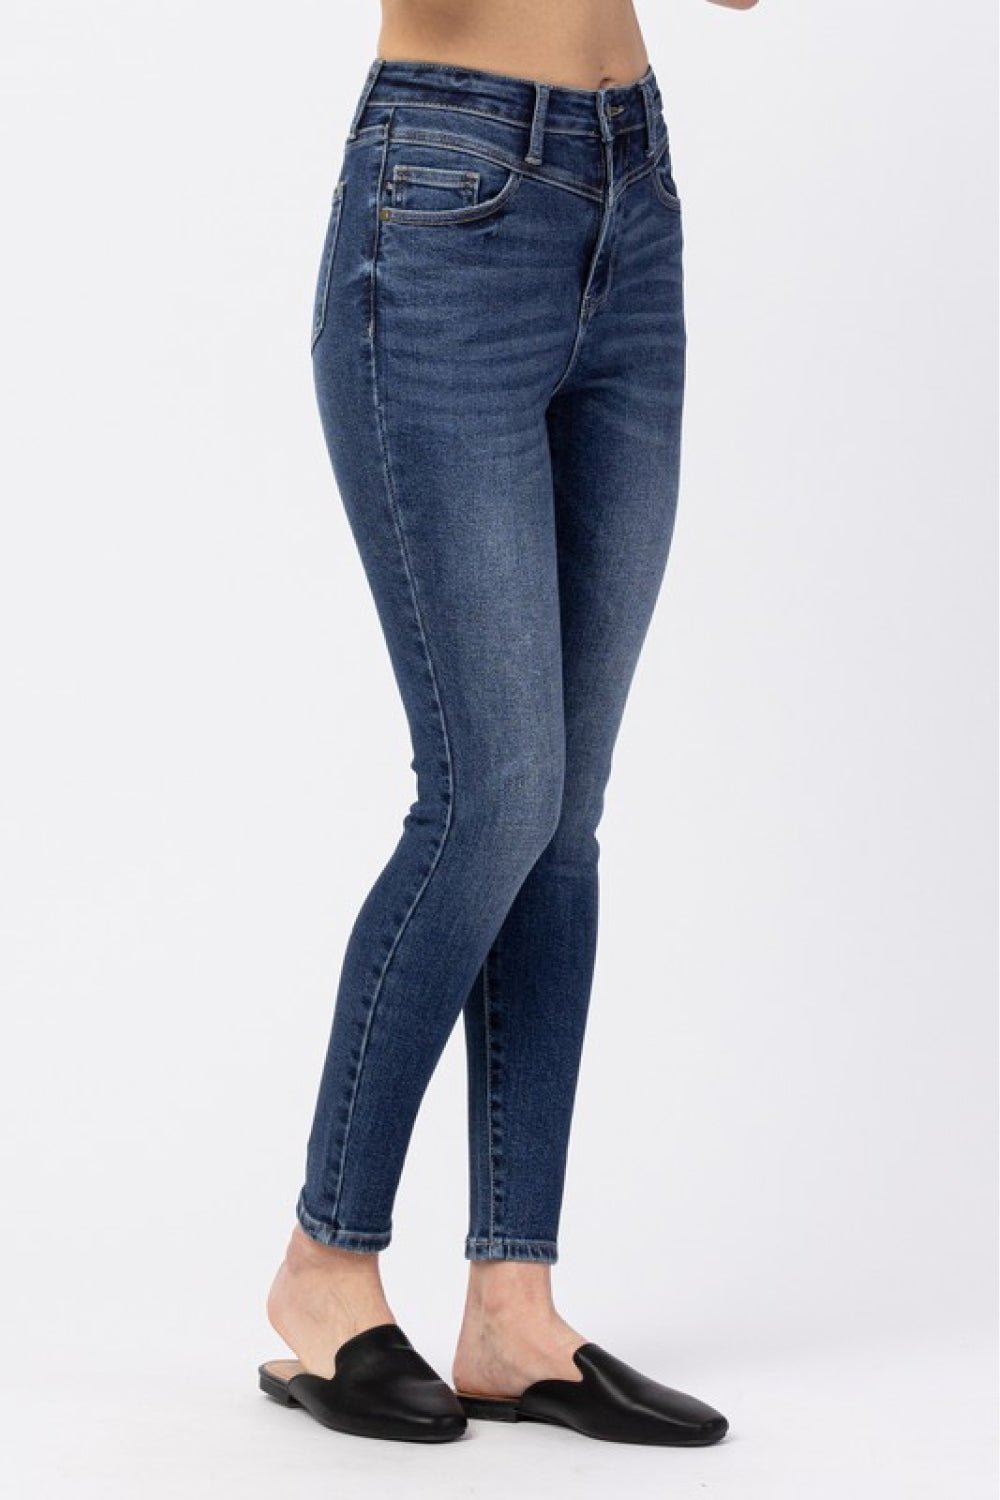 Judy Blue Full Size High-Rise Ankle-Length Jeans - Fashion Girl Online Store